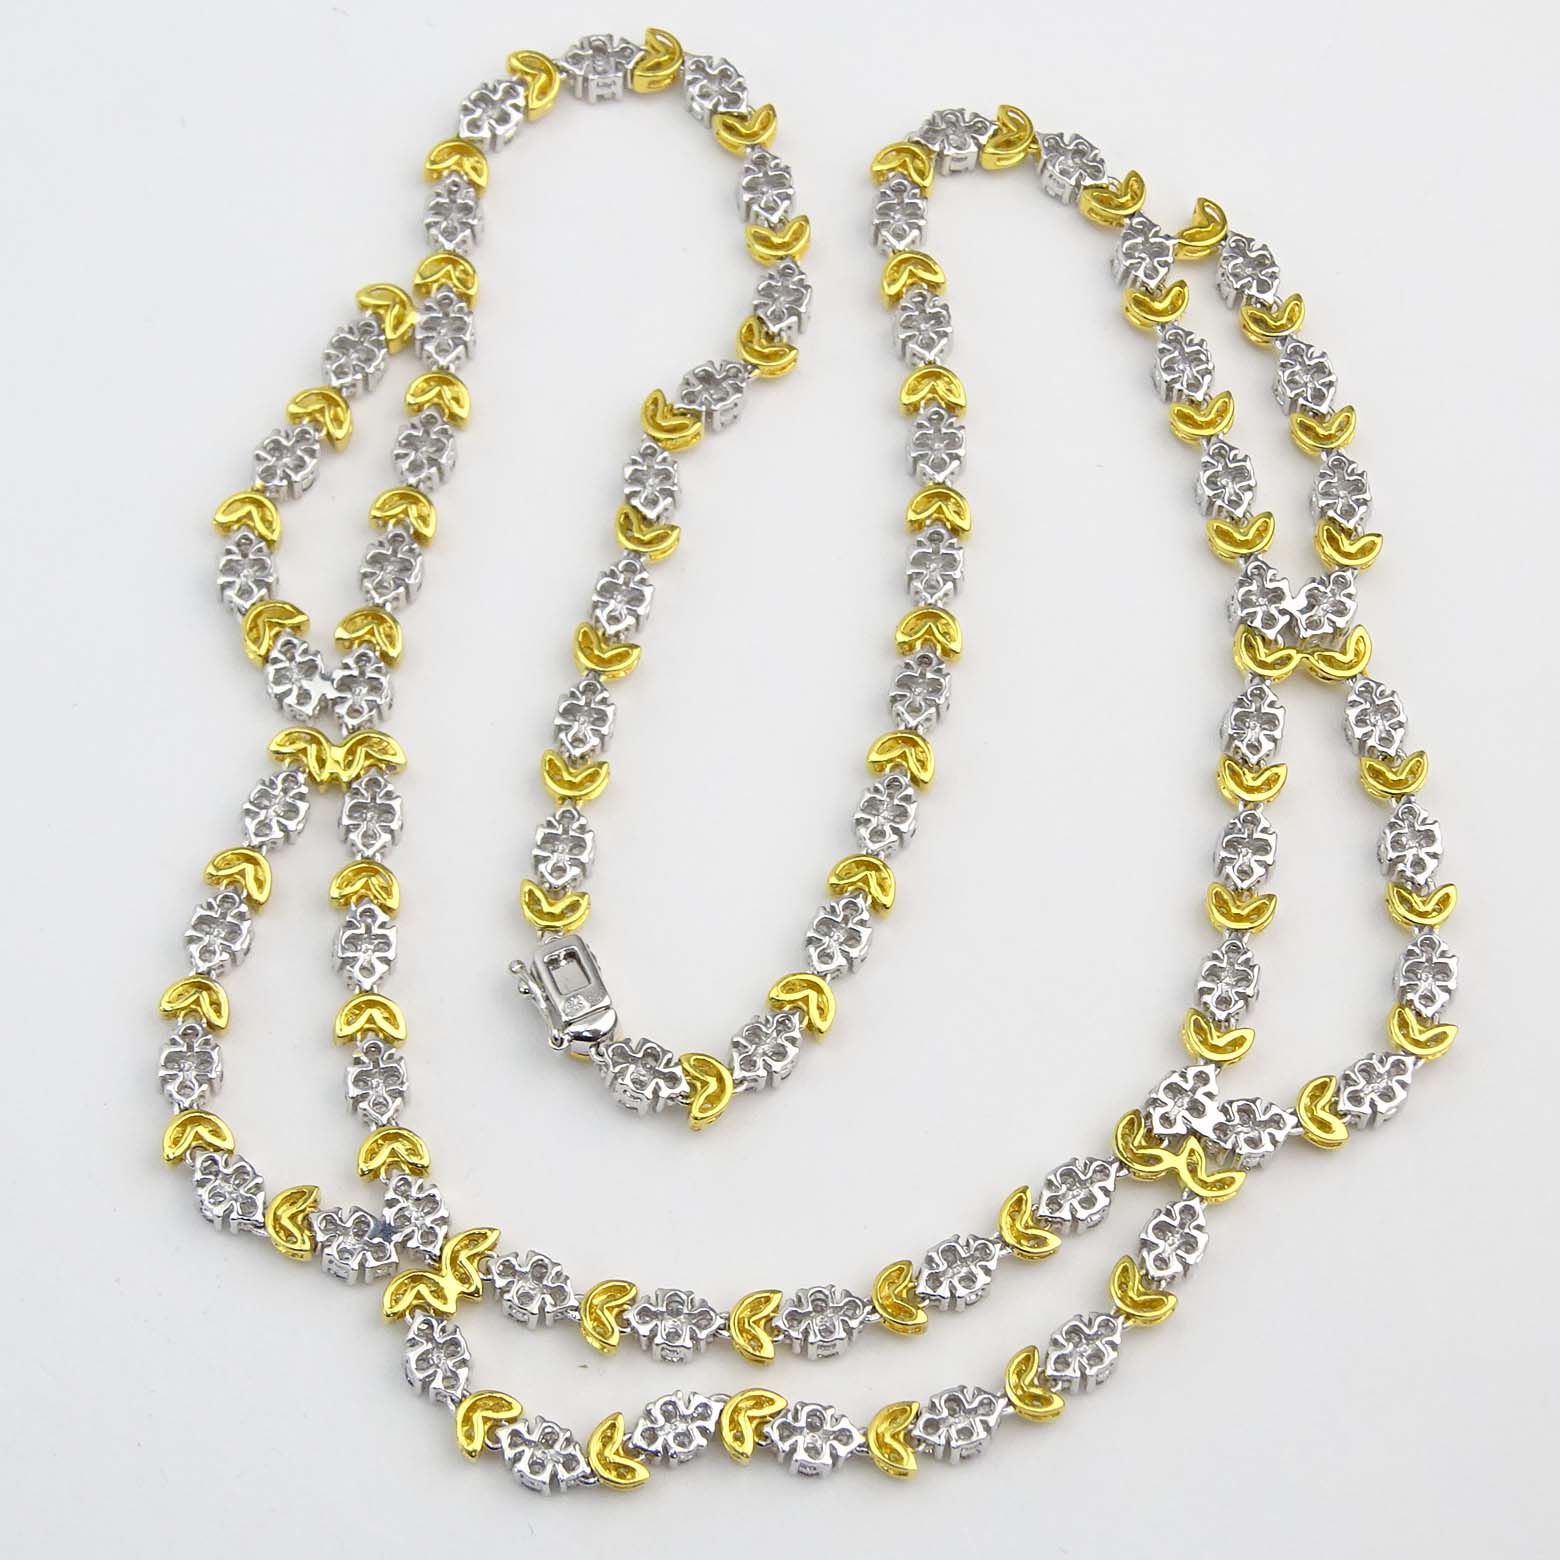 Approx. 15.71 Carat TW Fancy Yellow and White Diamond and 18 Karat Gold Necklace.